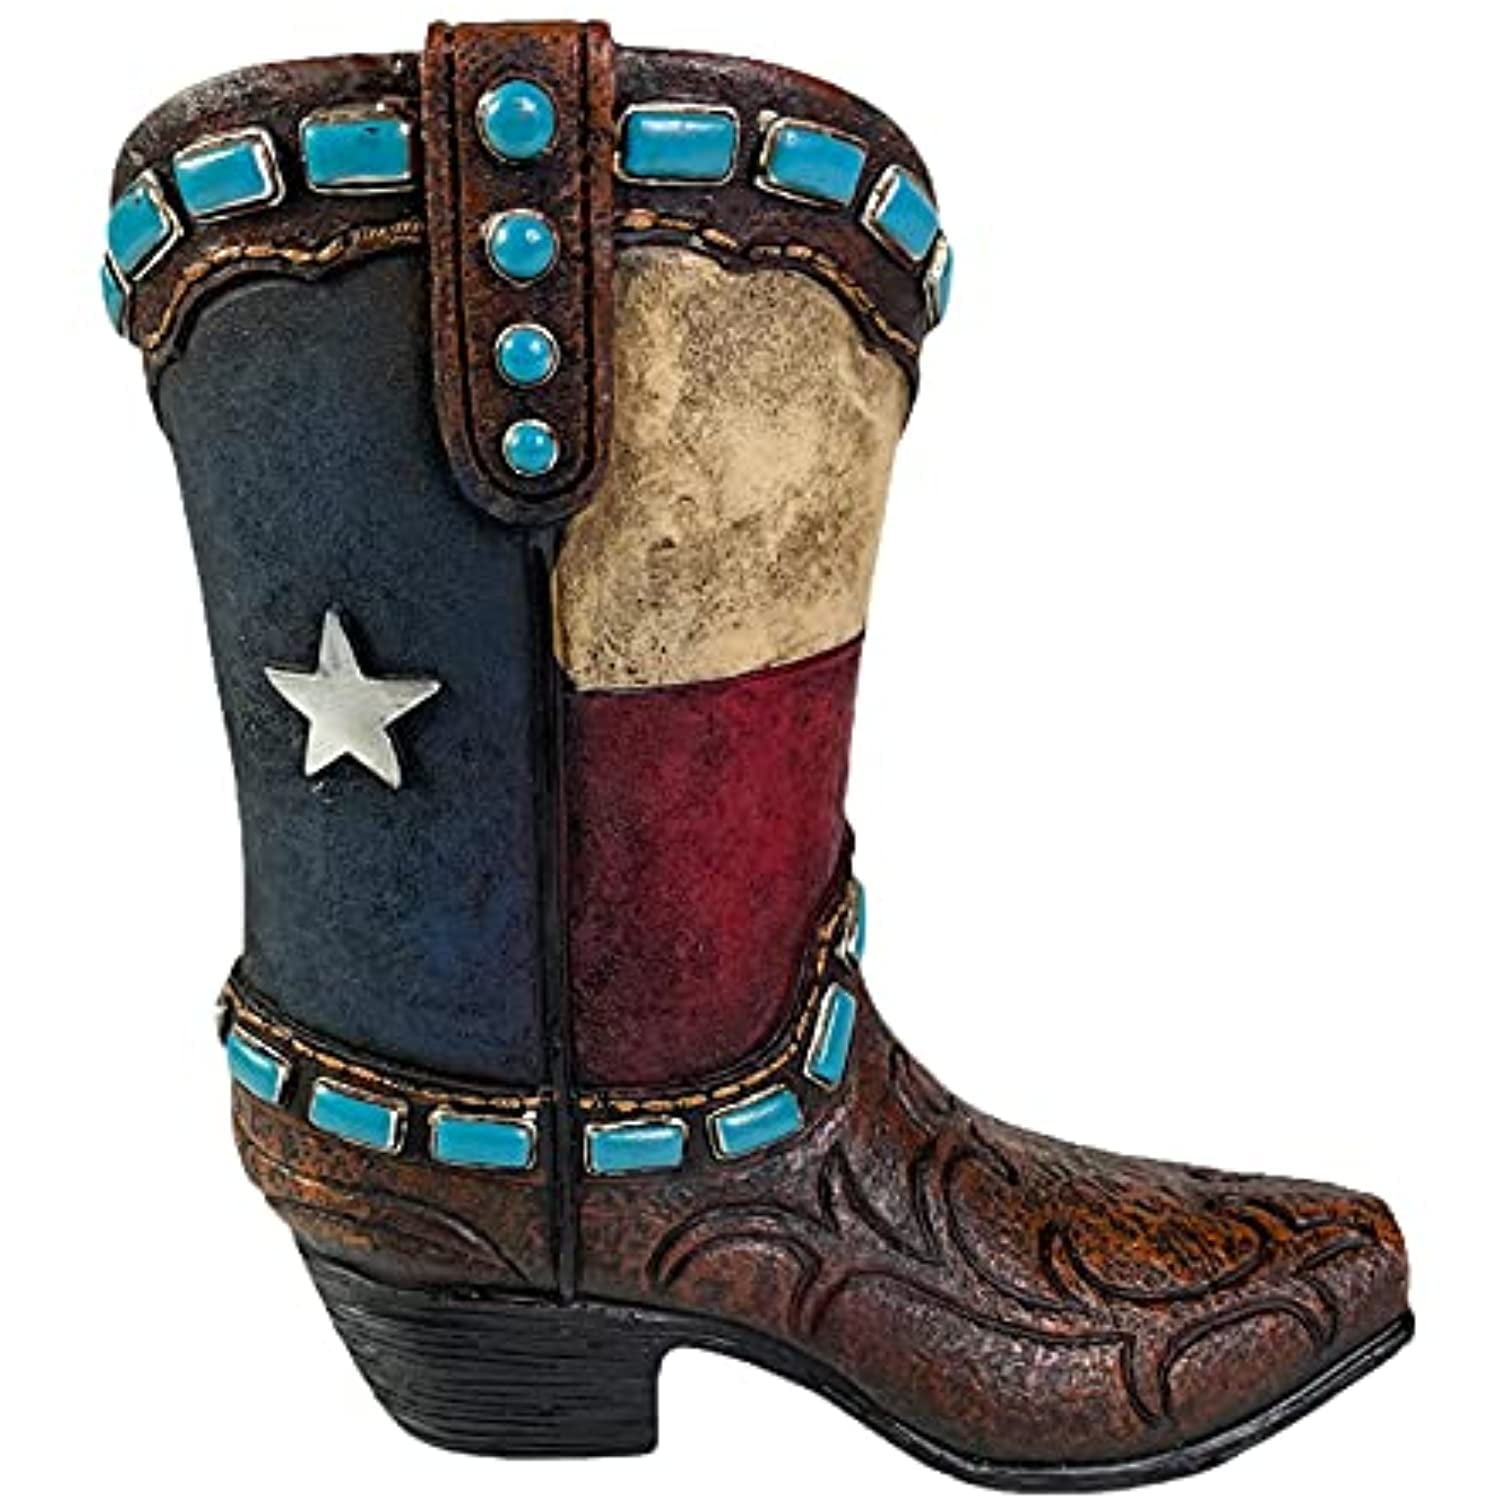 WESTERN RUSTIC Small COWBOY BOOT with SPURS PIGGY BANK Hand Painted UNIQUE GIFT 